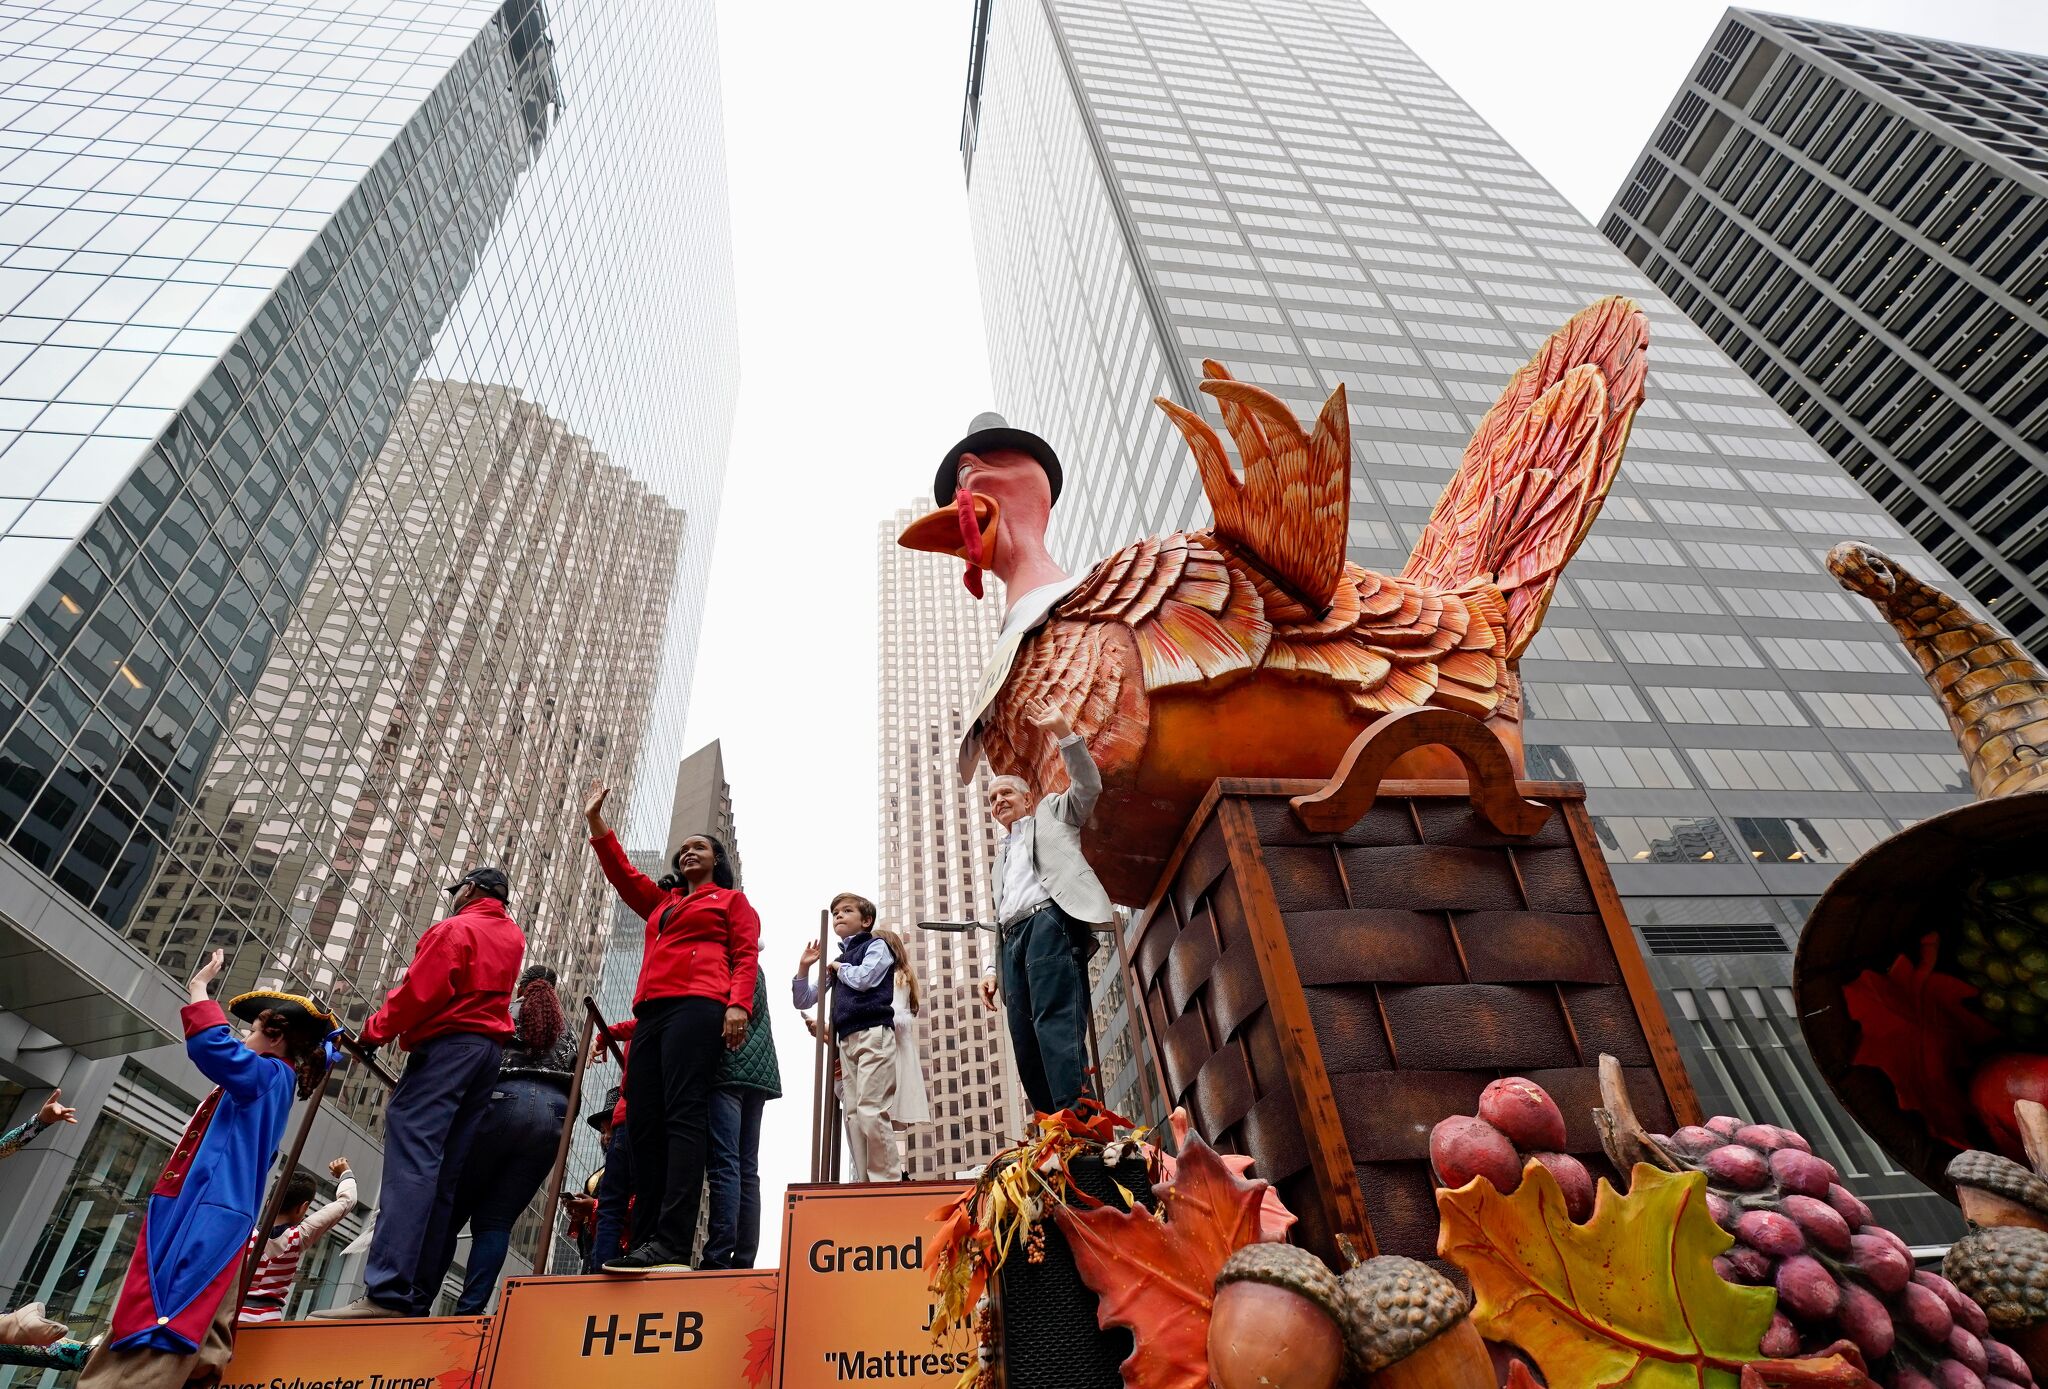 Houston H-E-B Thanksgiving Day Parade: What you need to know